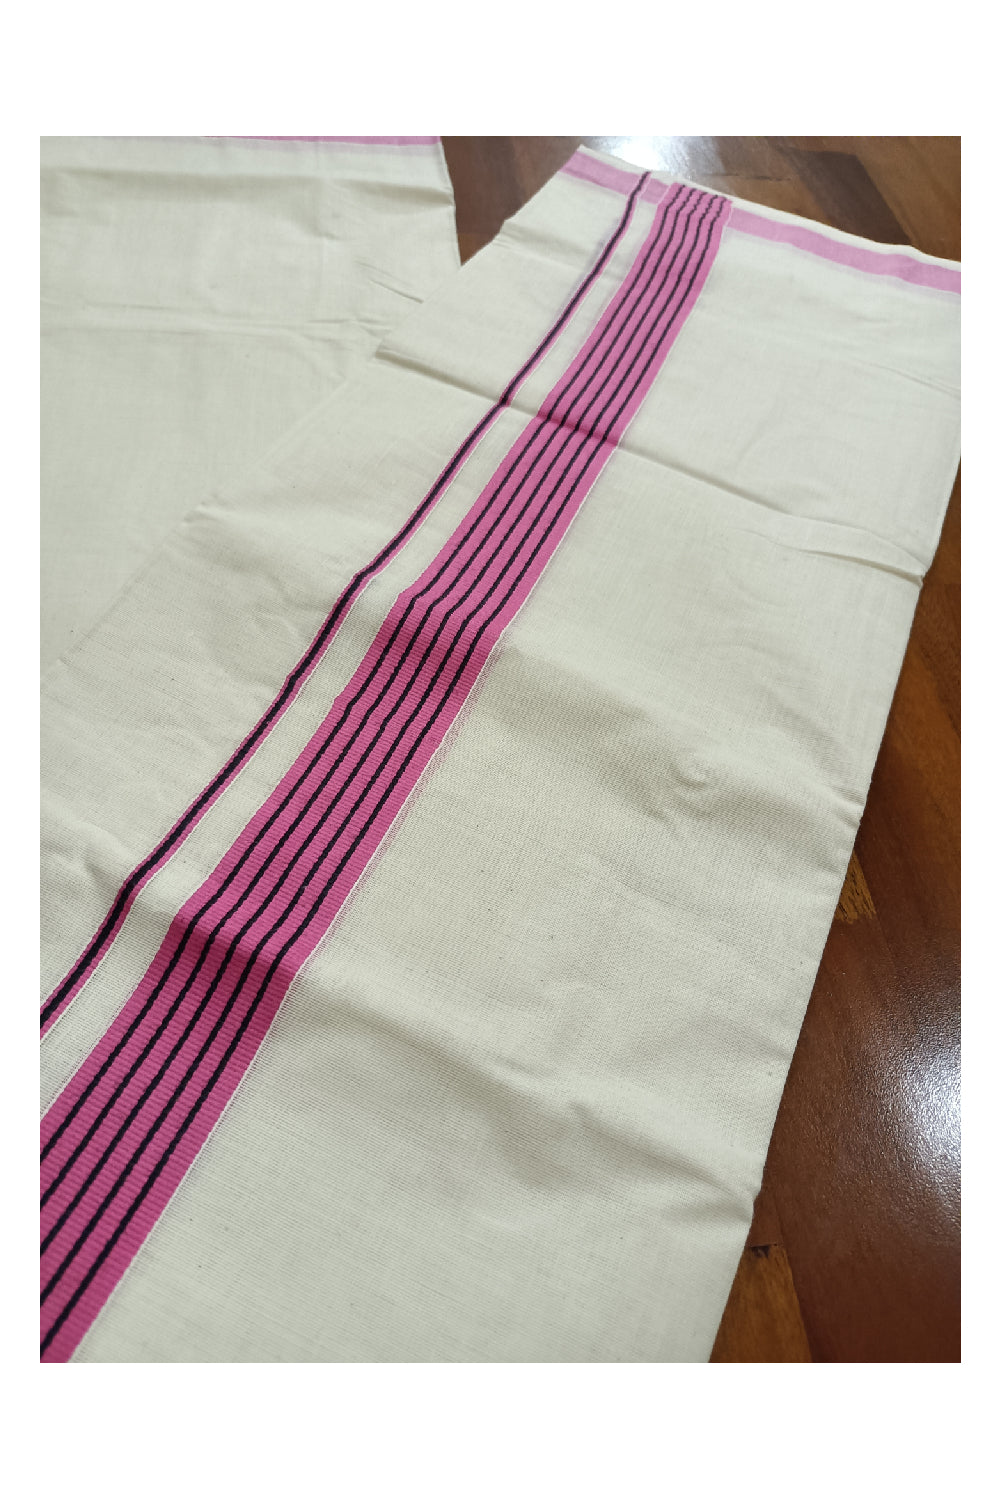 Off White Kerala Double Mundu with Black Lines on Pink Border (South Indian Dhoti)